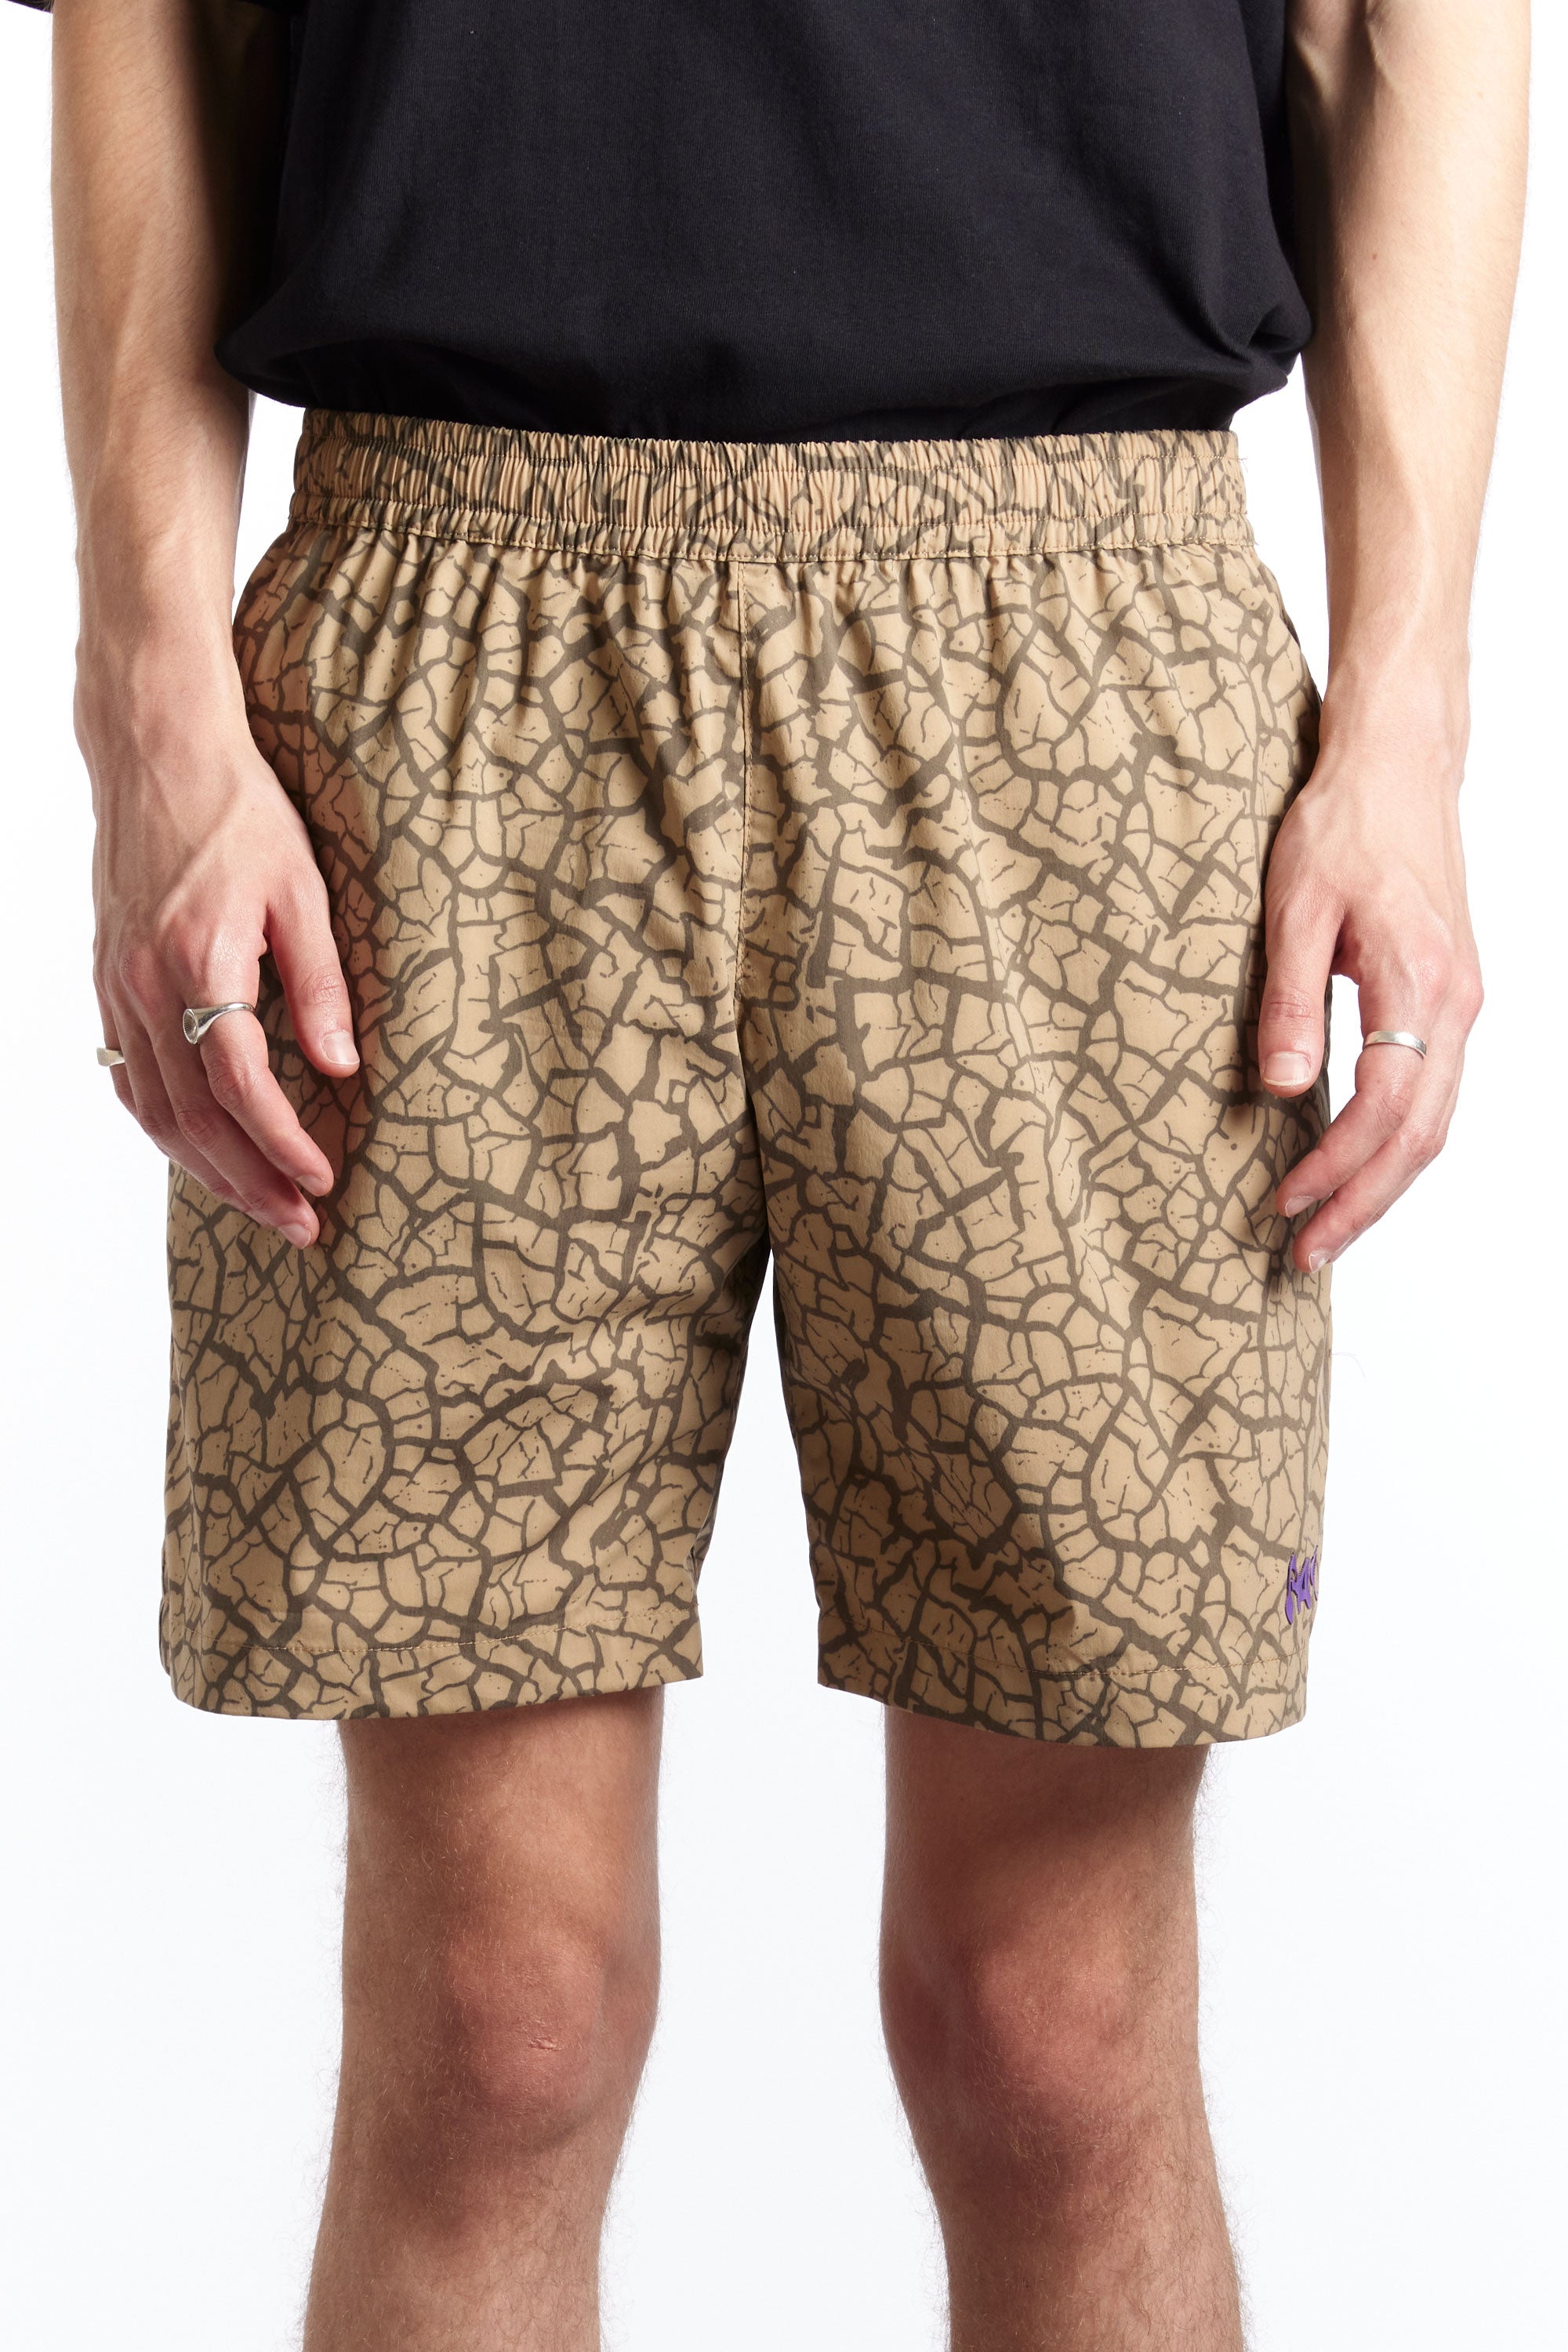 The MUDCRACK SWIM SHORTS  available online with global shipping, and in PAM Stores Melbourne and Sydney.